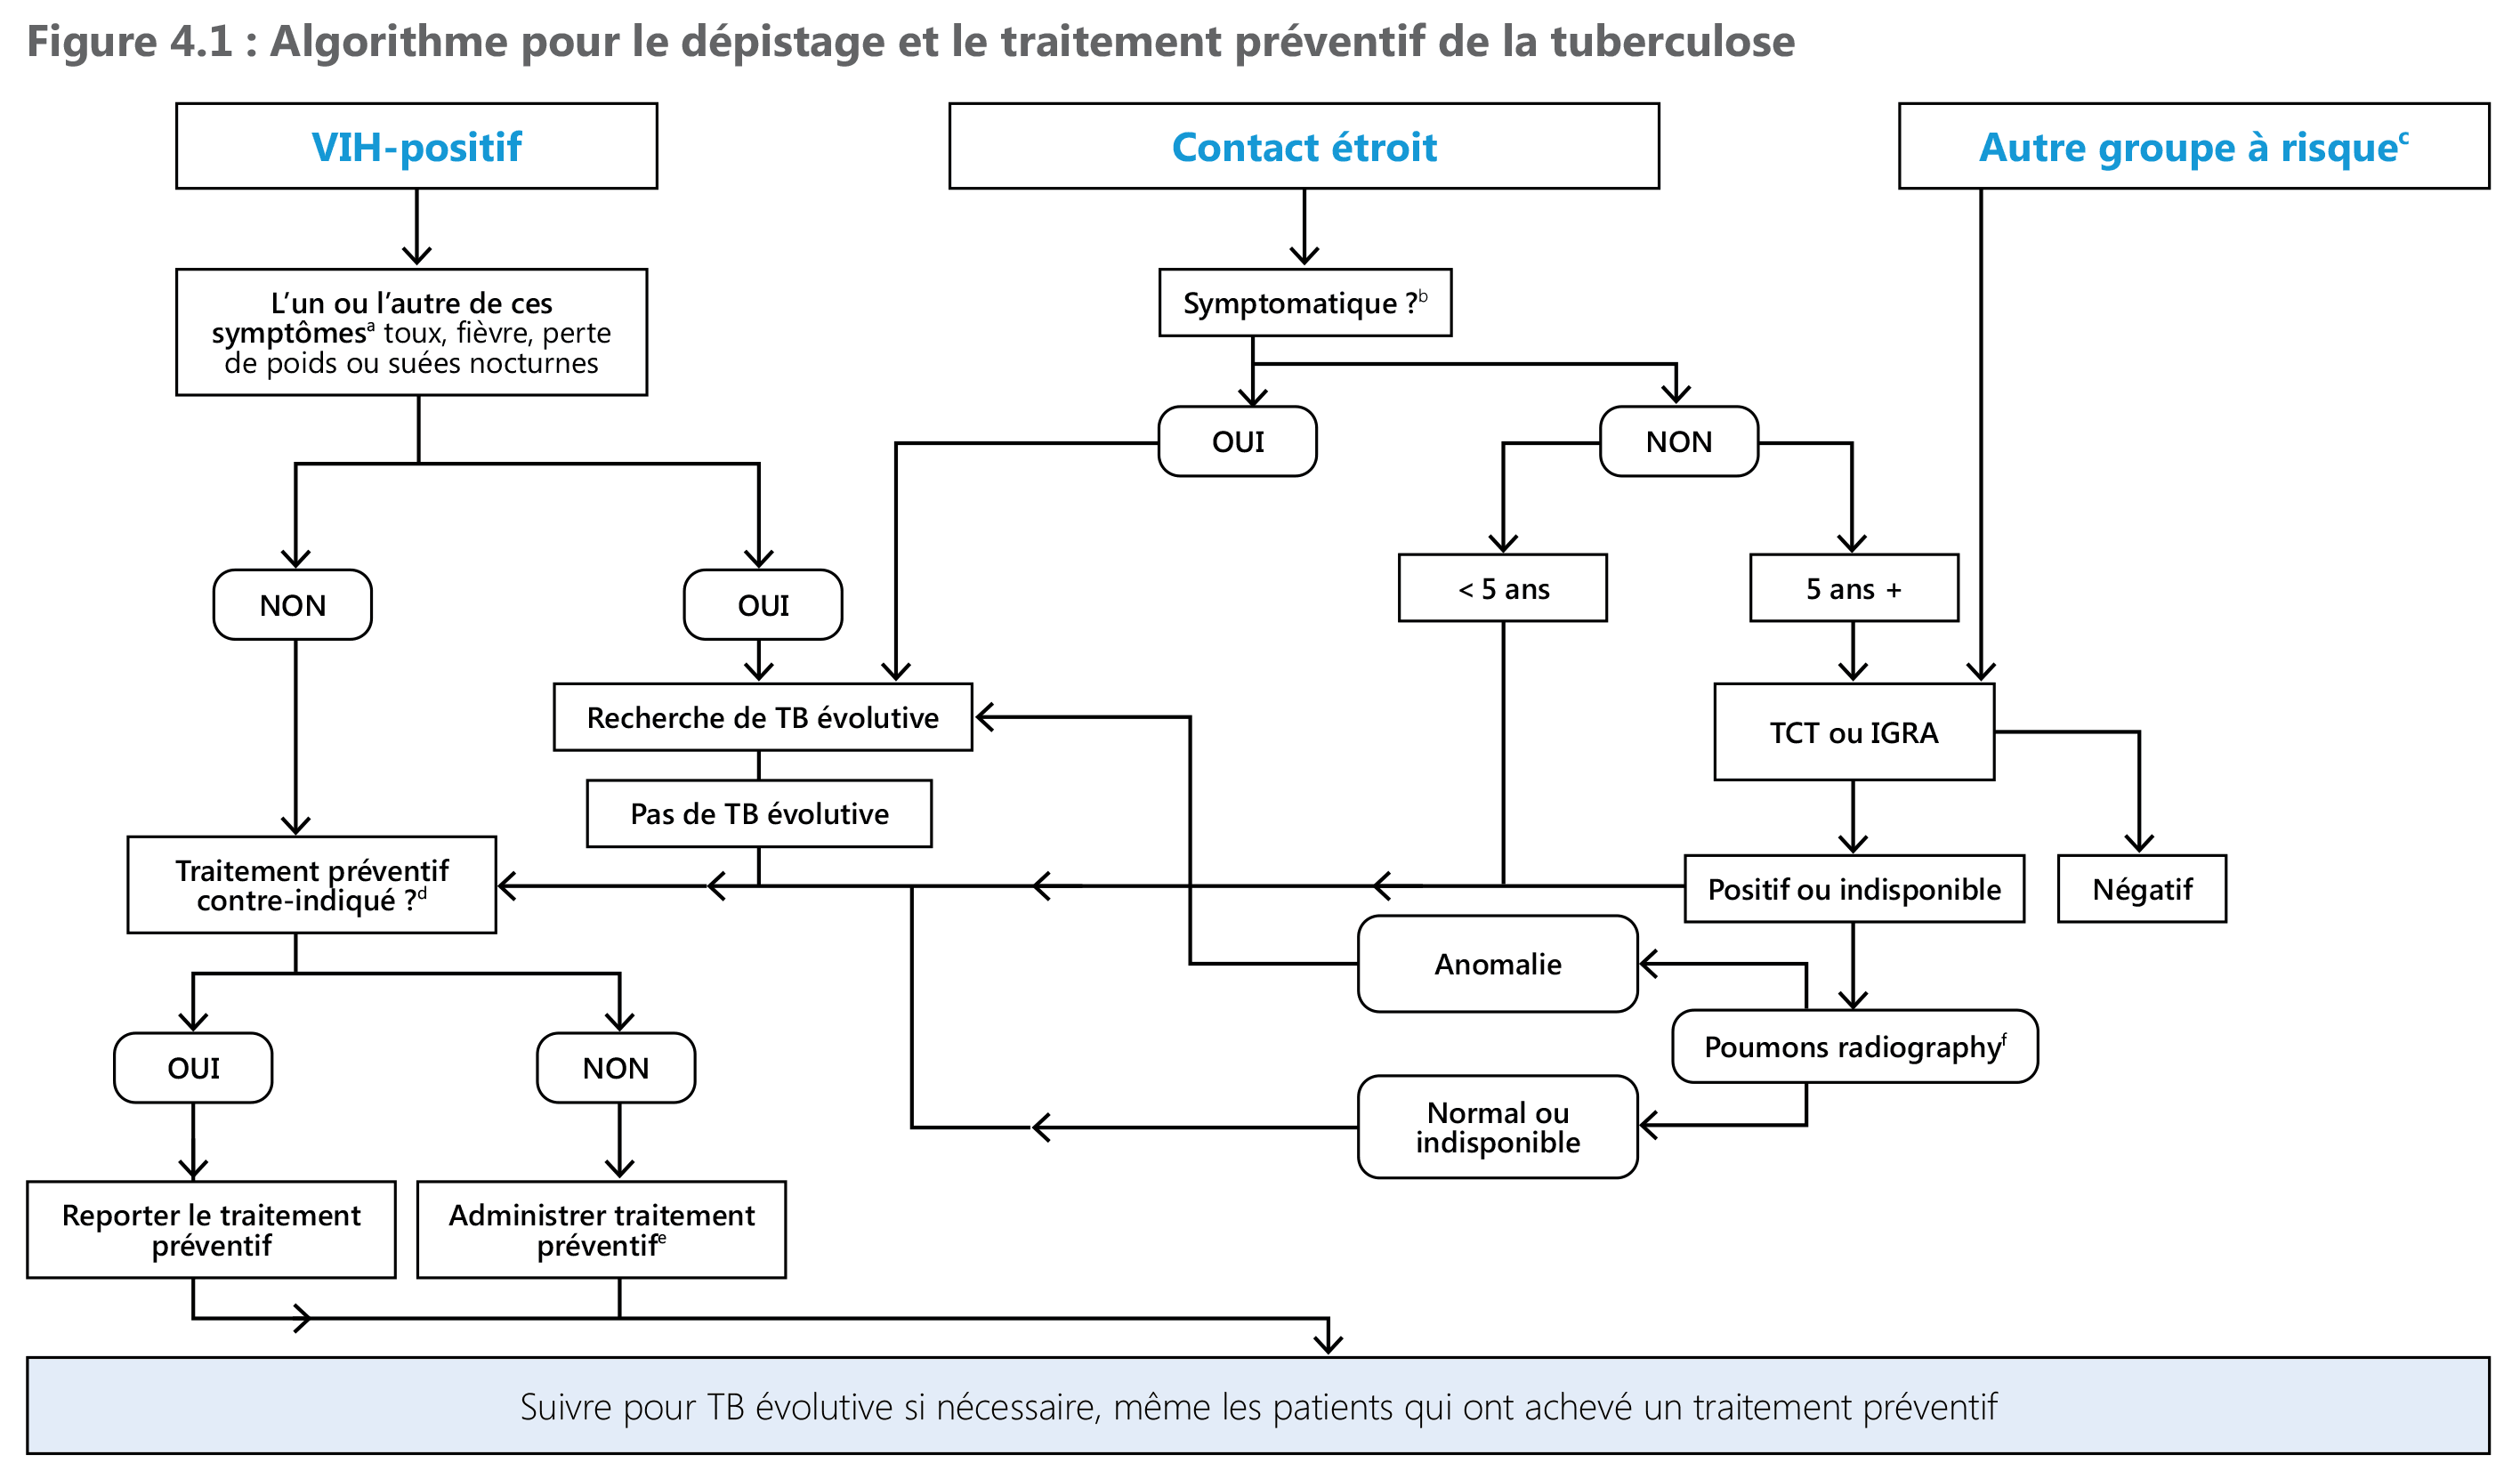 Algorithm for TB screening and TPT